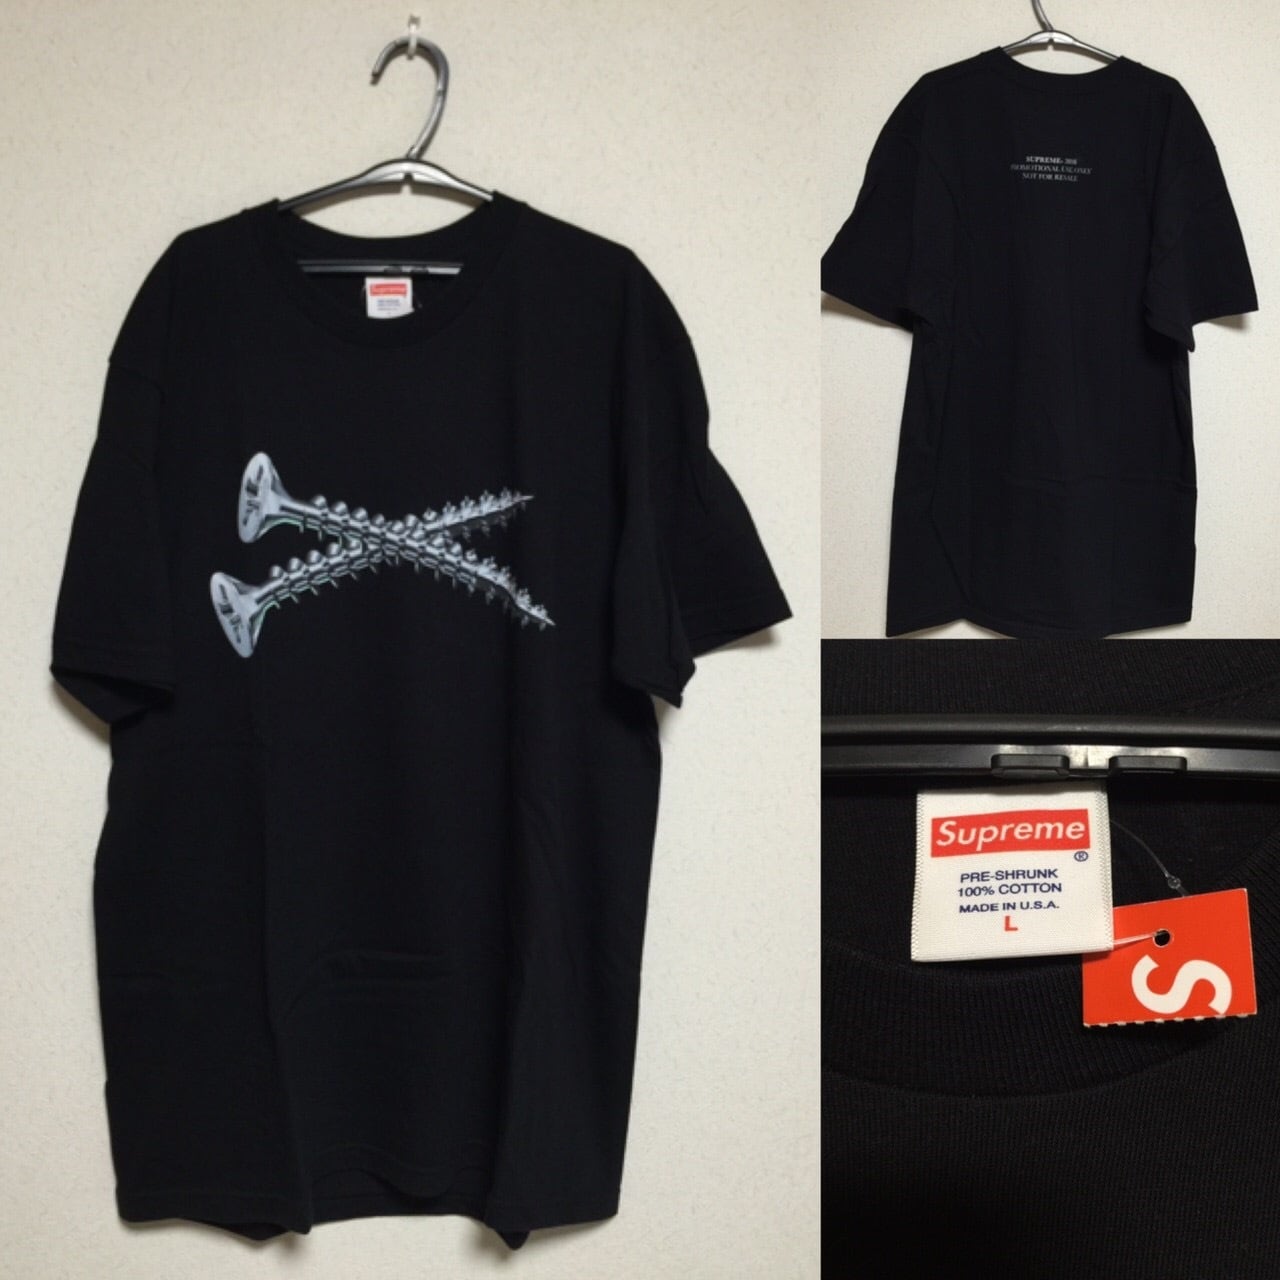 mens】Supreme screw T-shirt 16aw | STACS